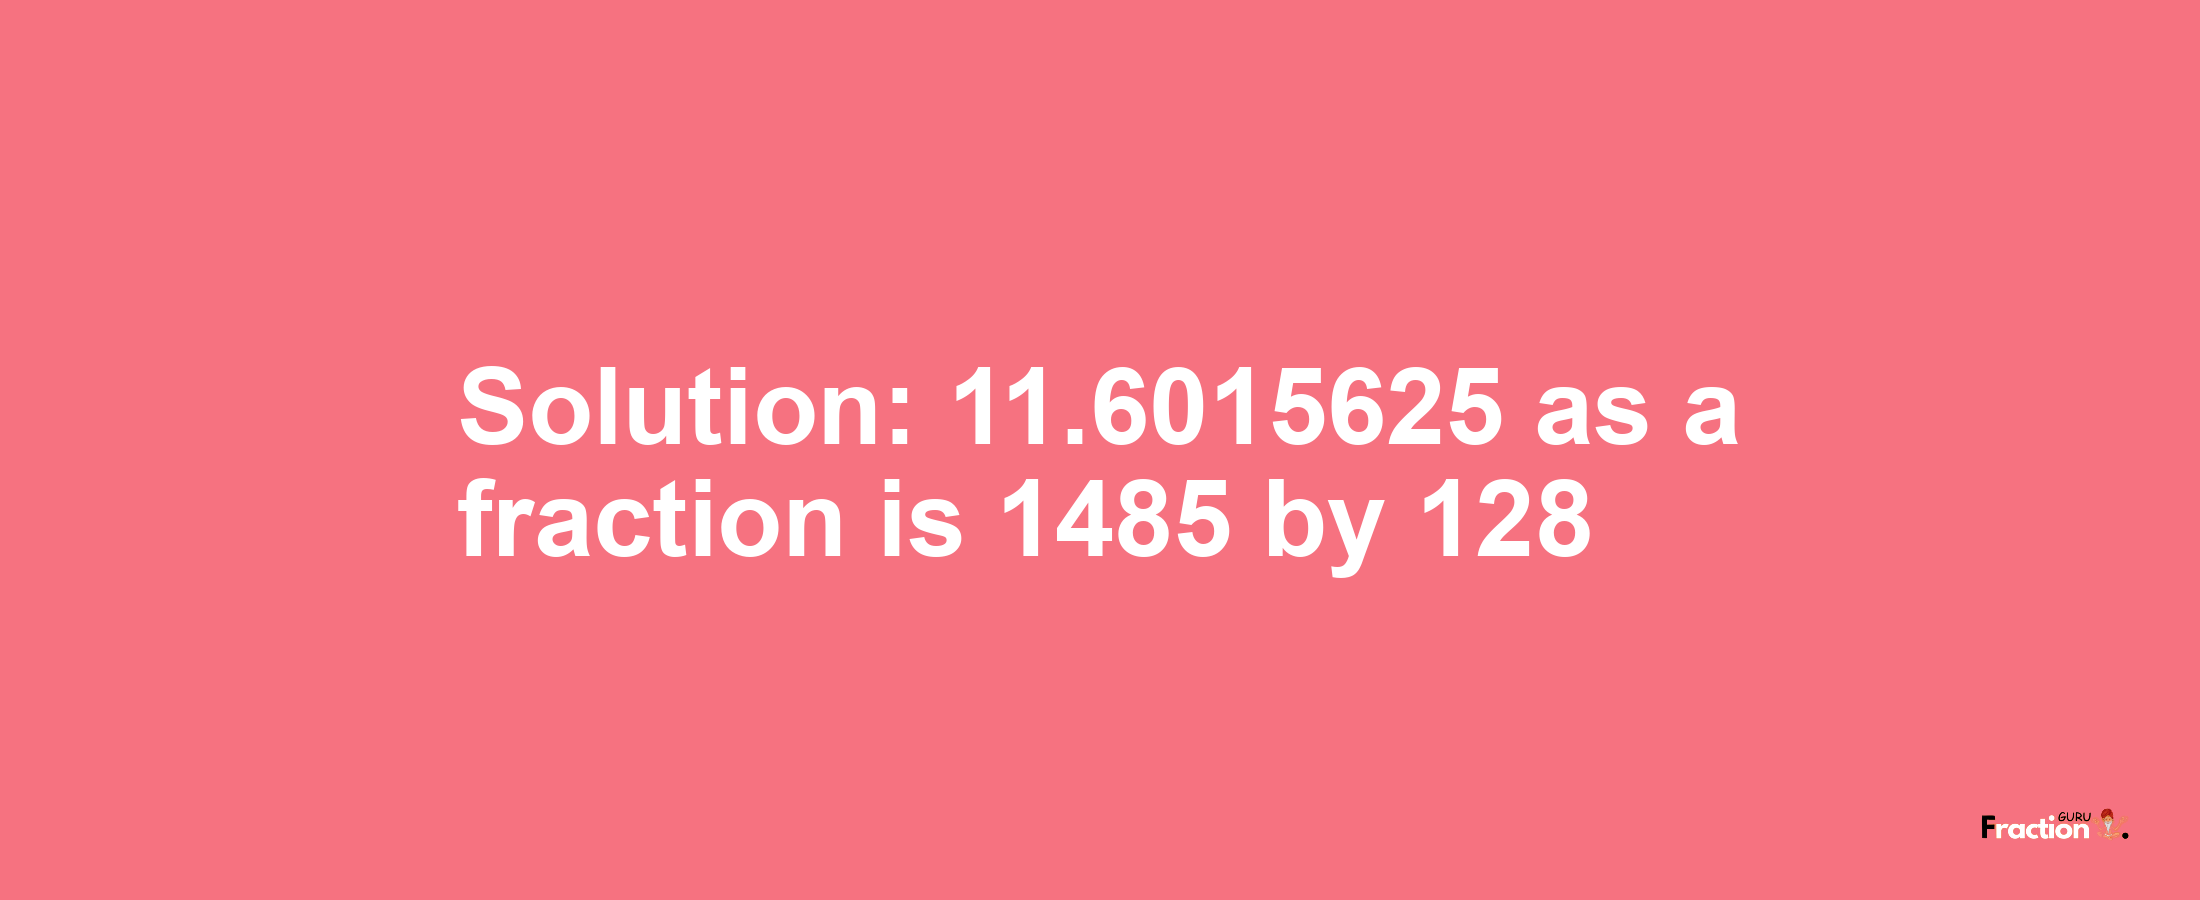 Solution:11.6015625 as a fraction is 1485/128